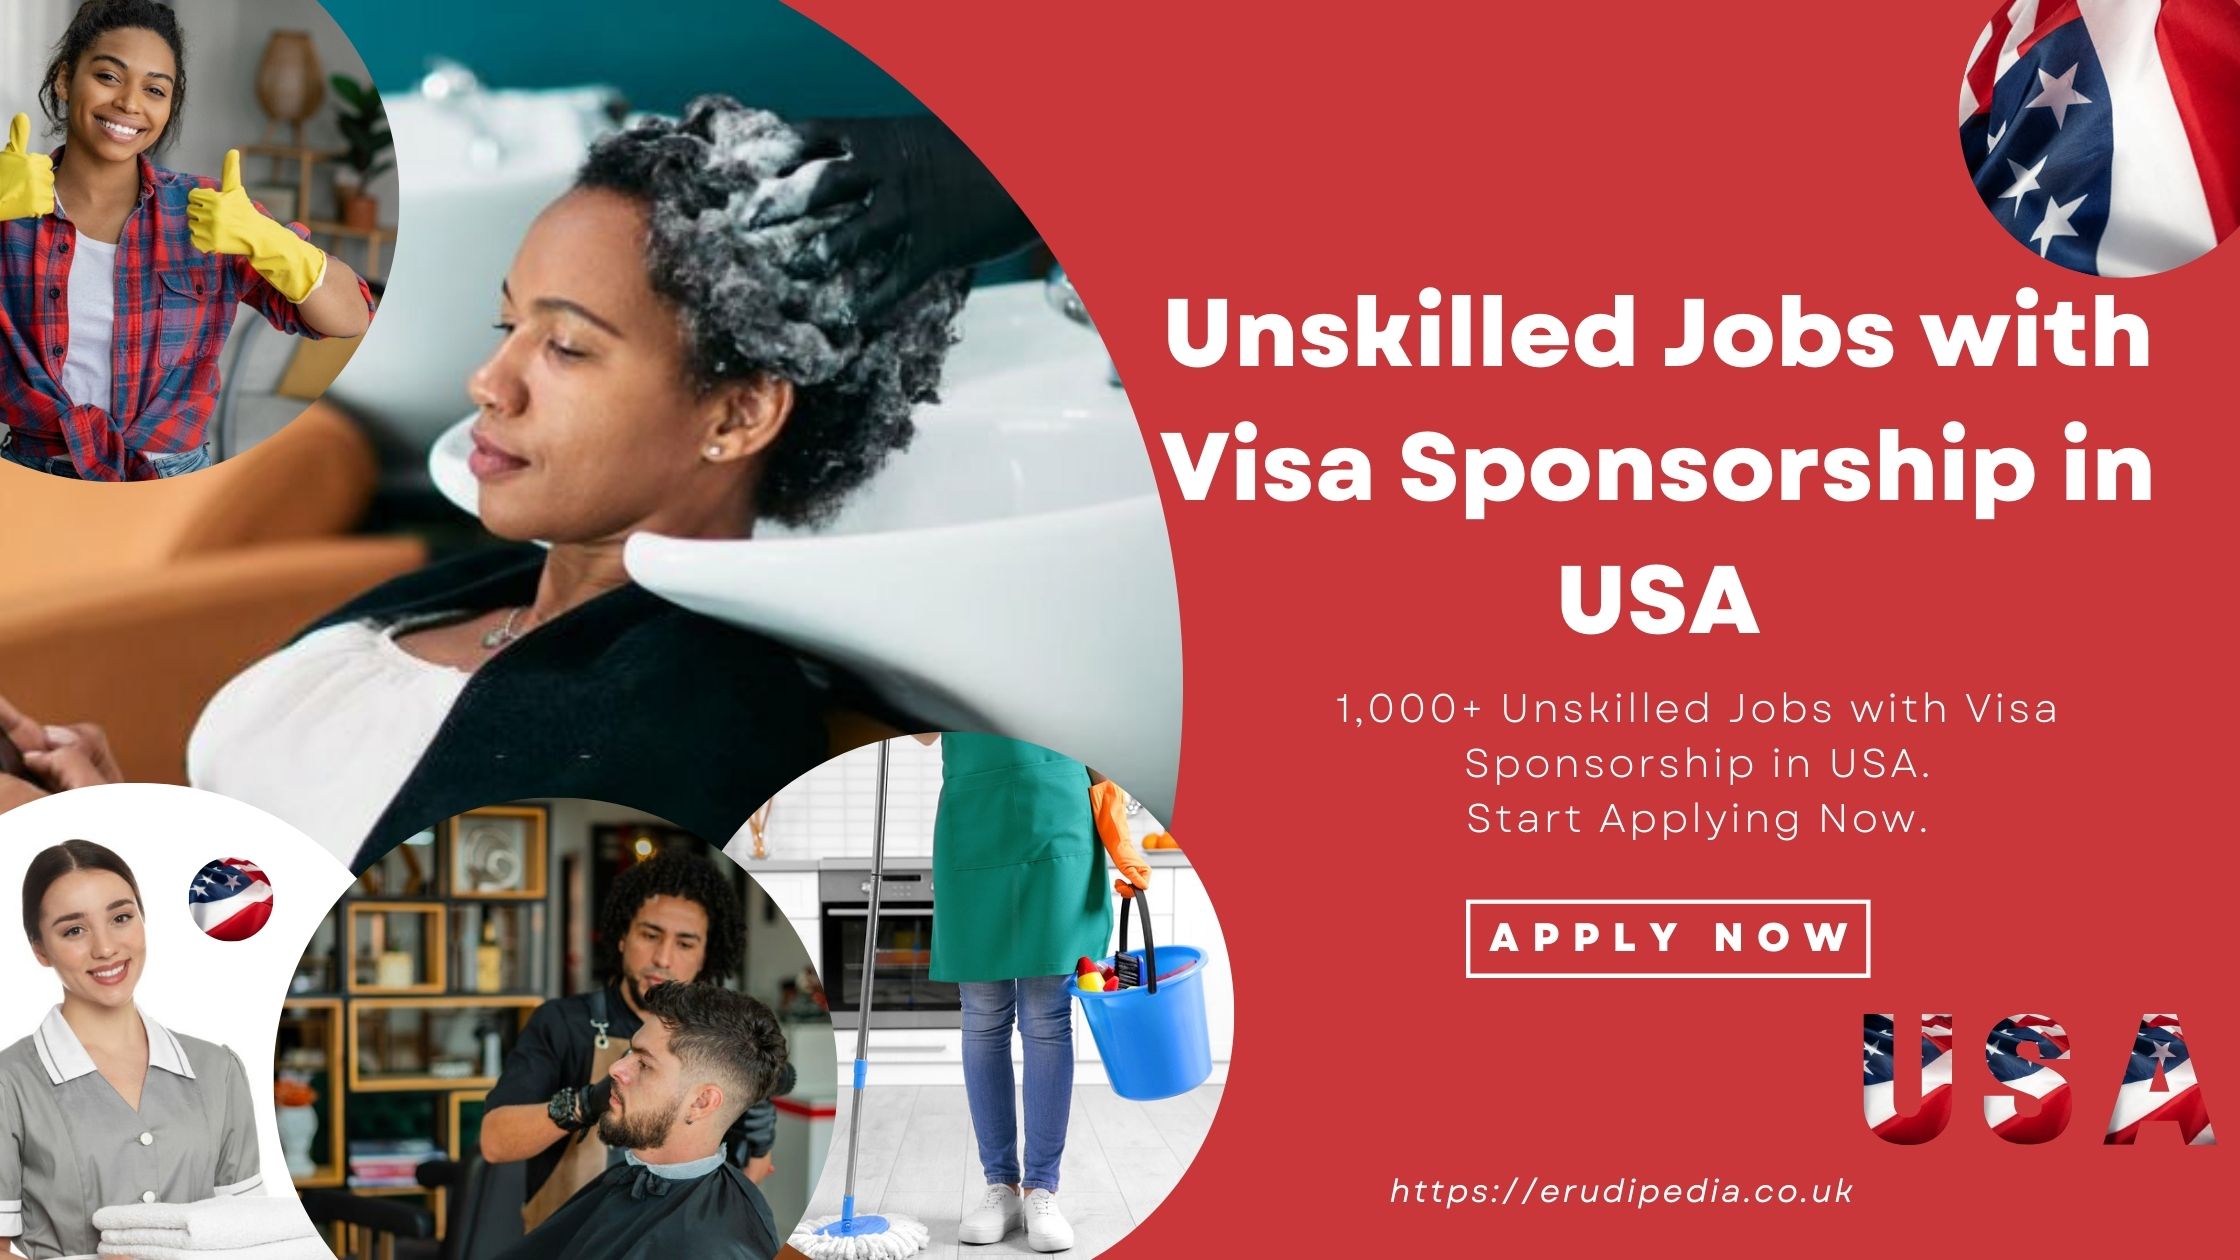 1,200 Unskilled Jobs with Visa Sponsorship in USA - Apply Now